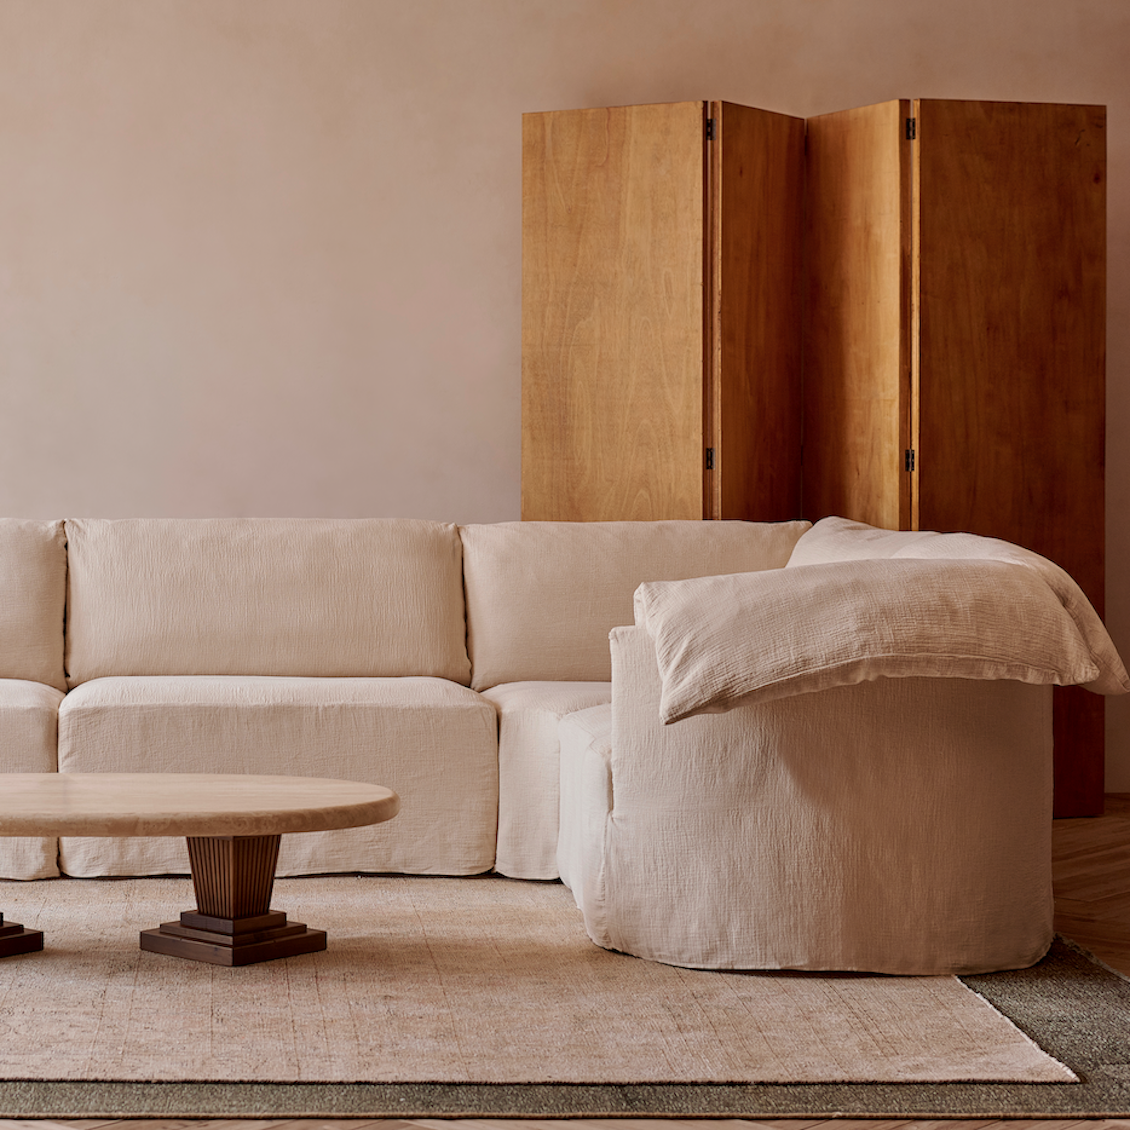 Loula Corner Sectional in Corn Silk, a light beige Washed Cotton Linen, placed in a decorated room around the Cordelia Coffee Table